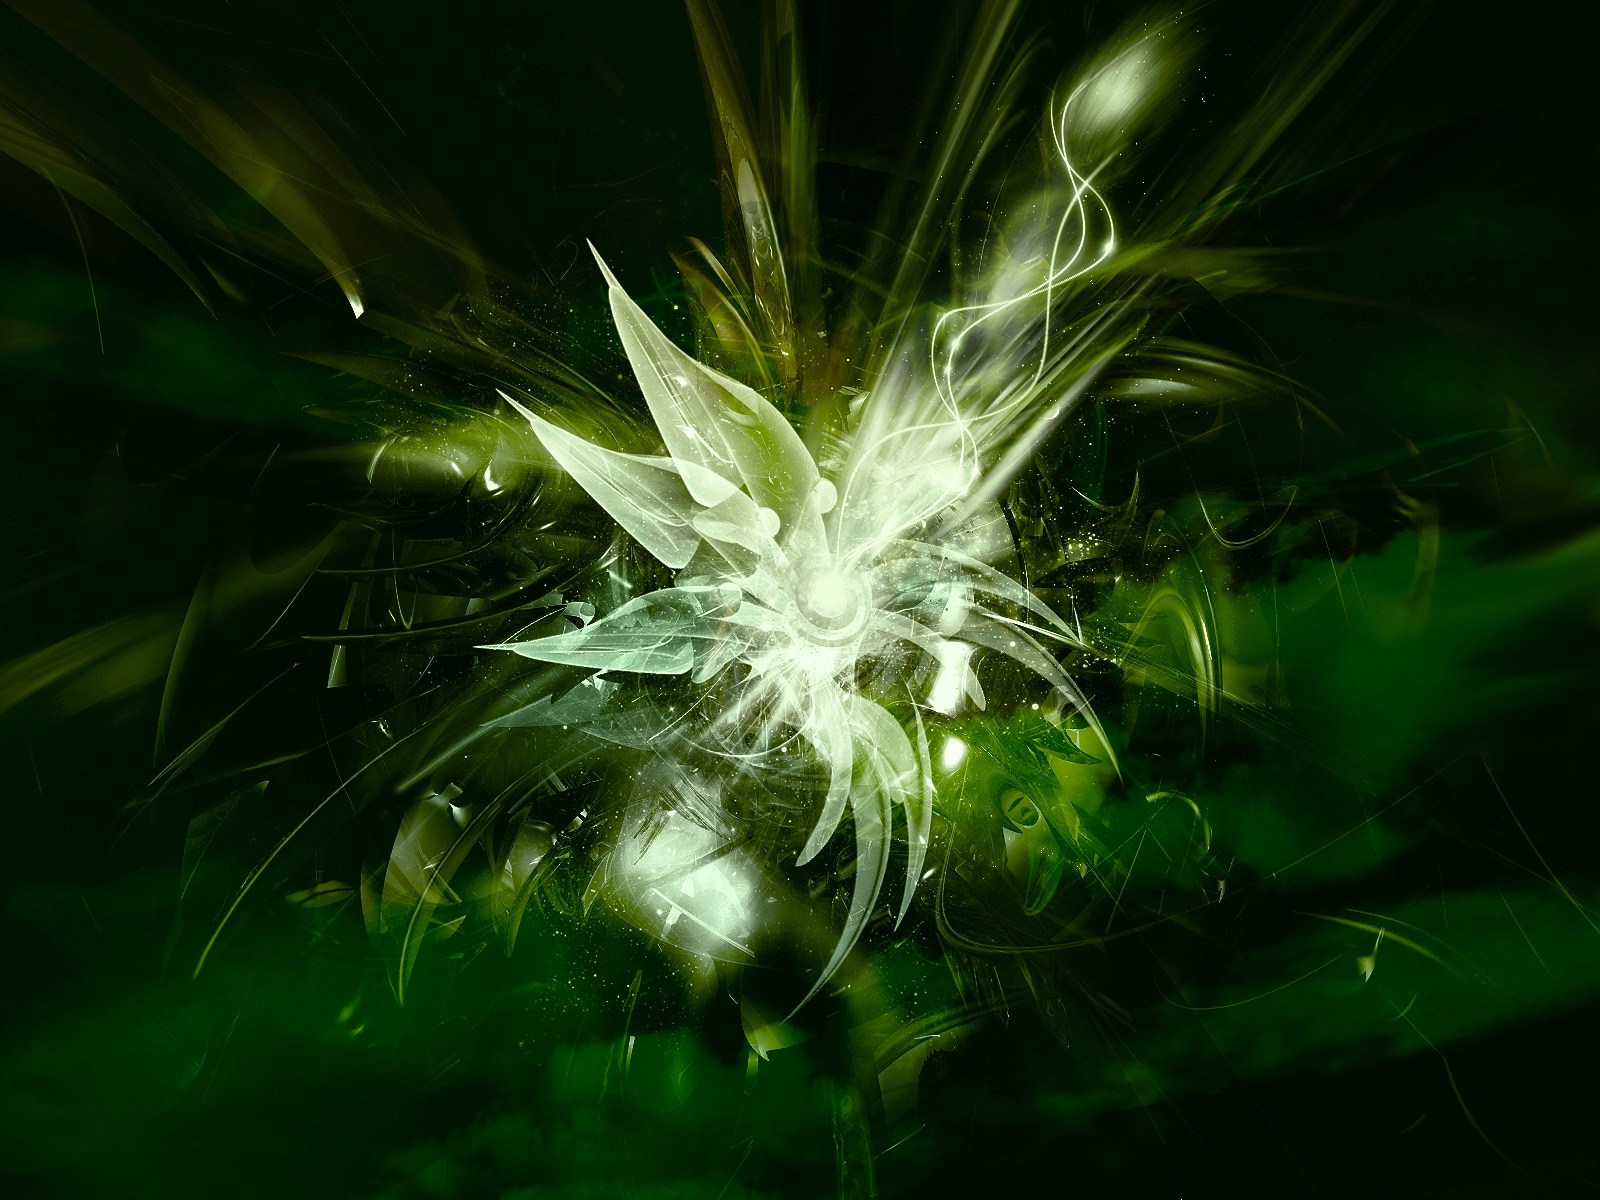 green, abstract, texture 2160p